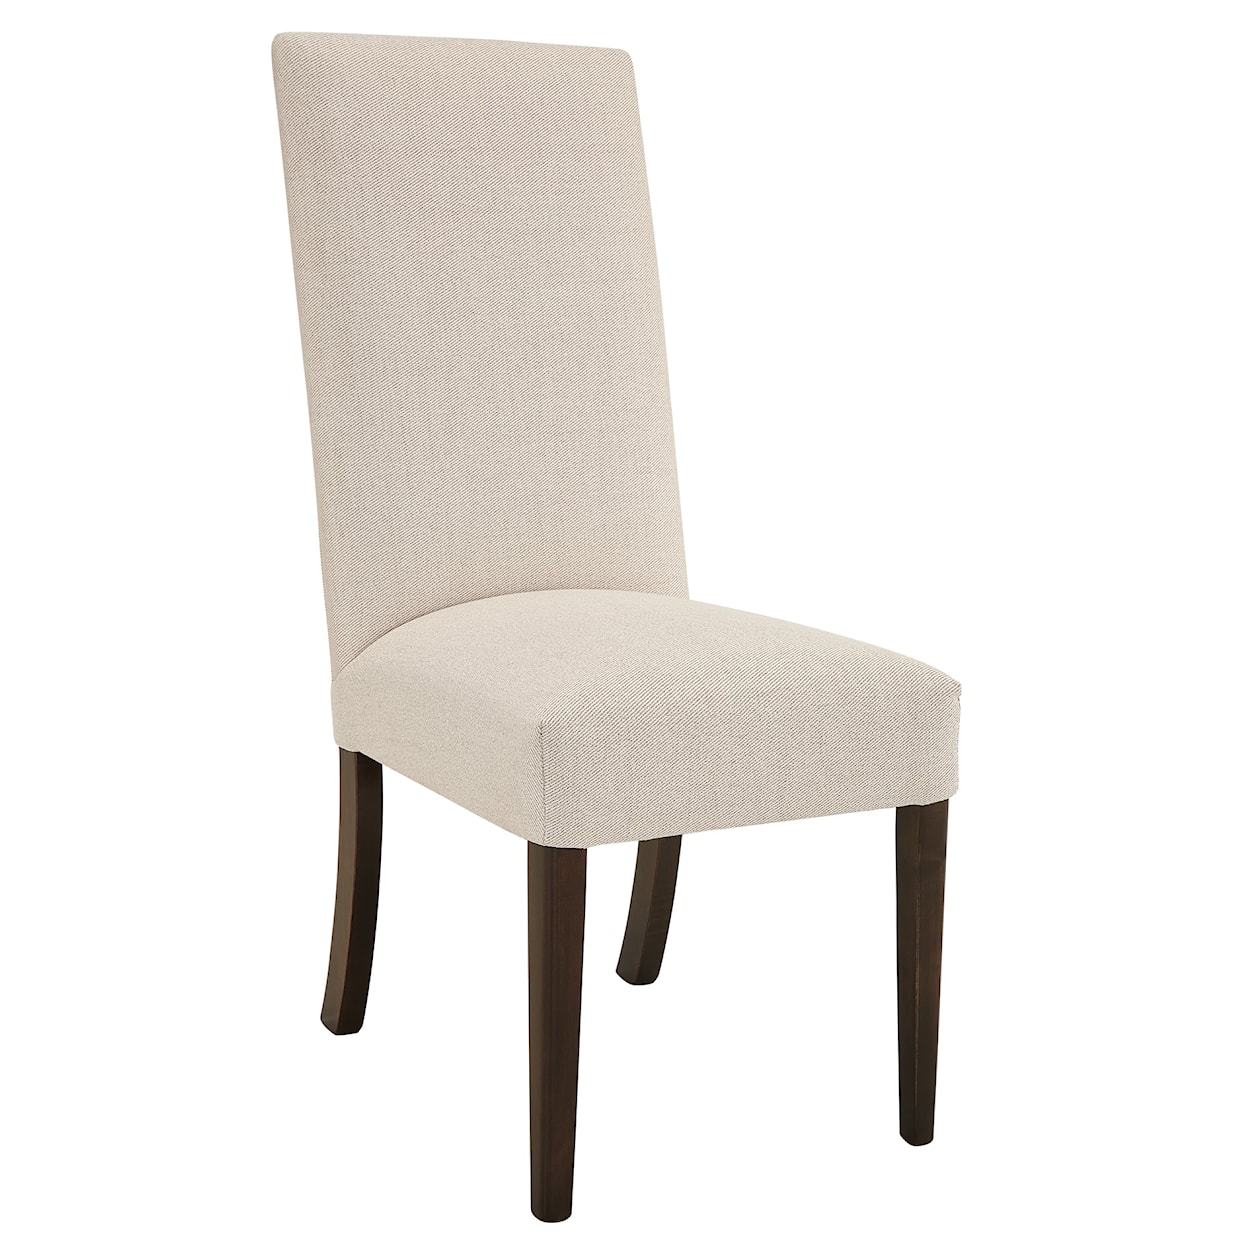 Archbold Furniture Amish Essentials Casual Dining Xavier Dining Side Chair